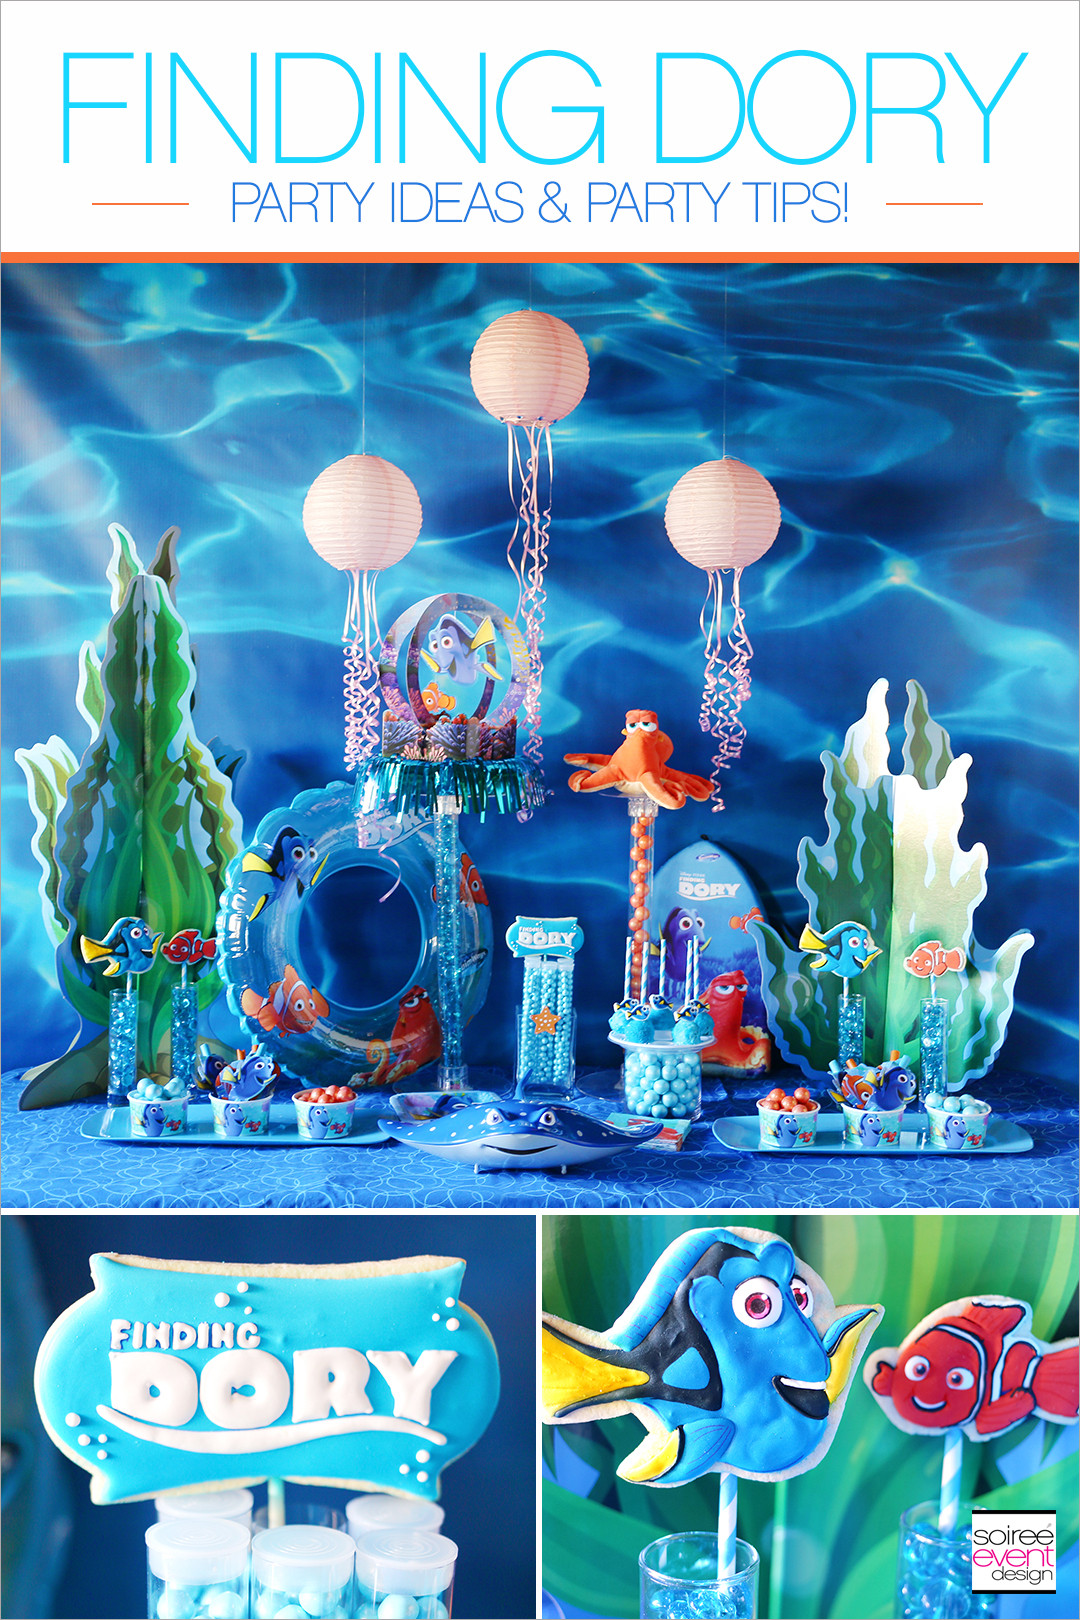 Dory Birthday Party Ideas
 Finding Dory Party Ideas Soiree Event Design